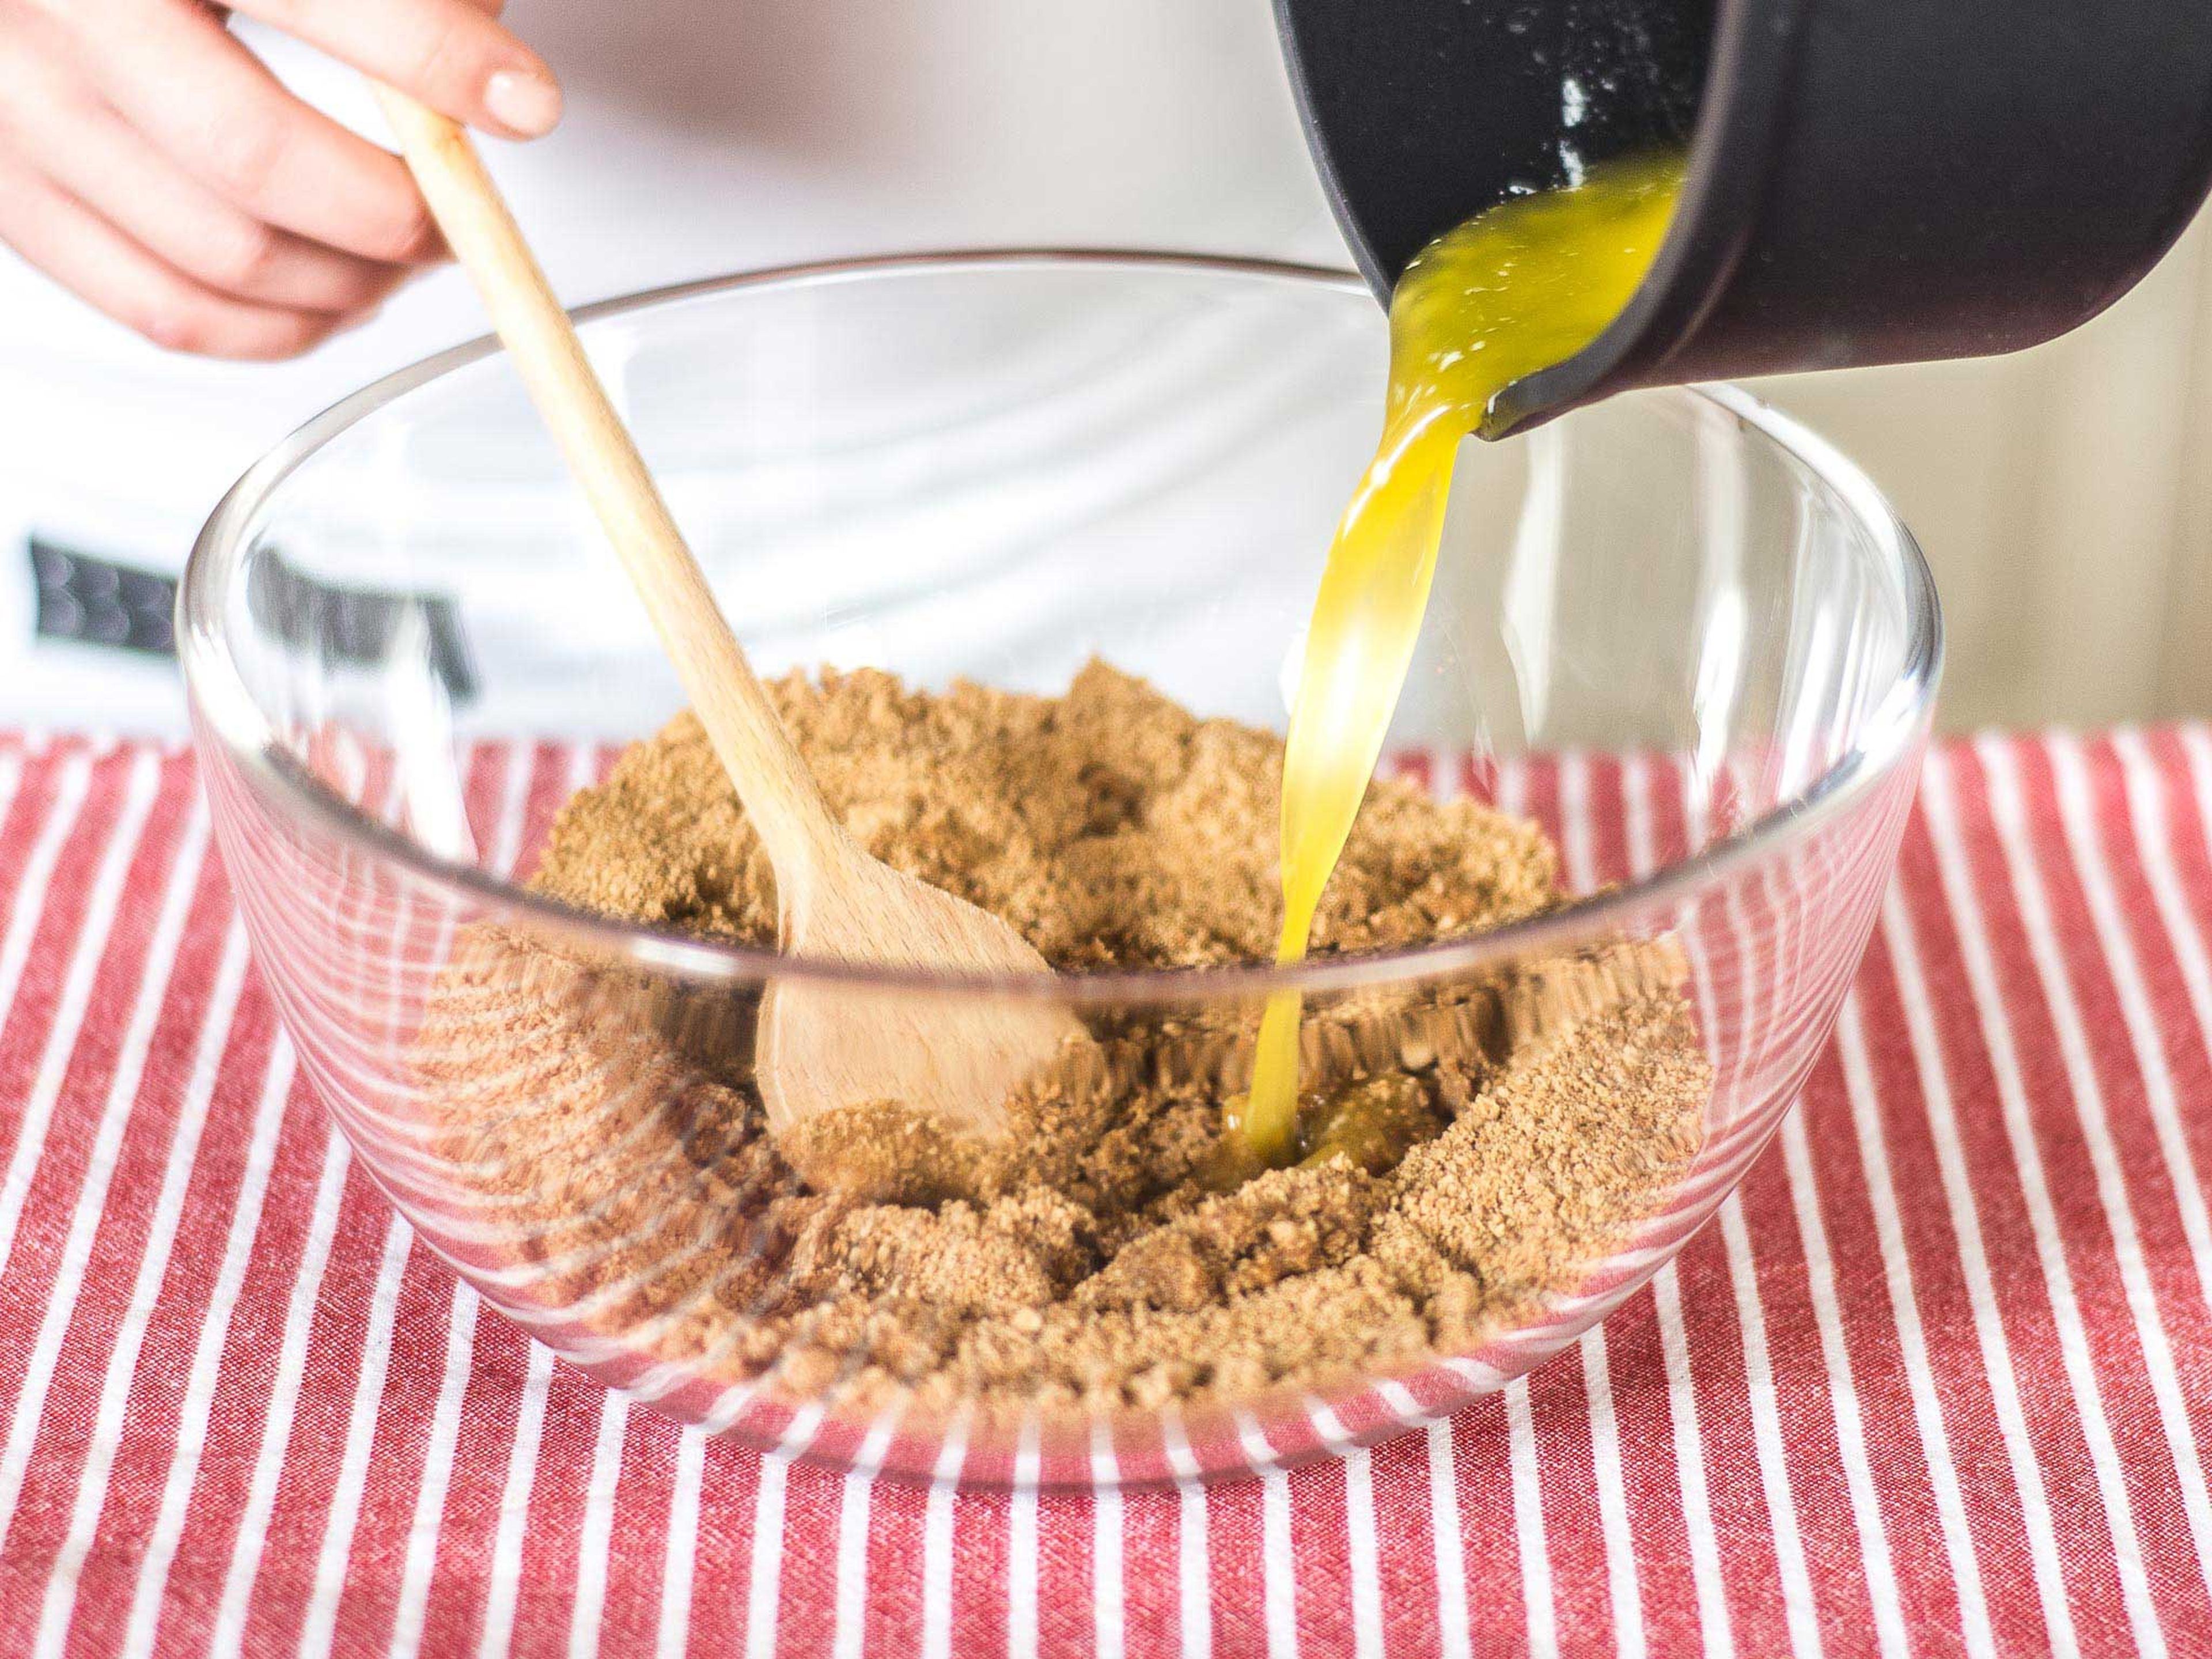 Preheat the oven to 180°C/ 350°F. To make the crust, finely pulse whole wheat graham crackers in a food processor. Add zest of one orange and half a lemon. Melt butter and pour directly onto the crumbs, stirring to combine.